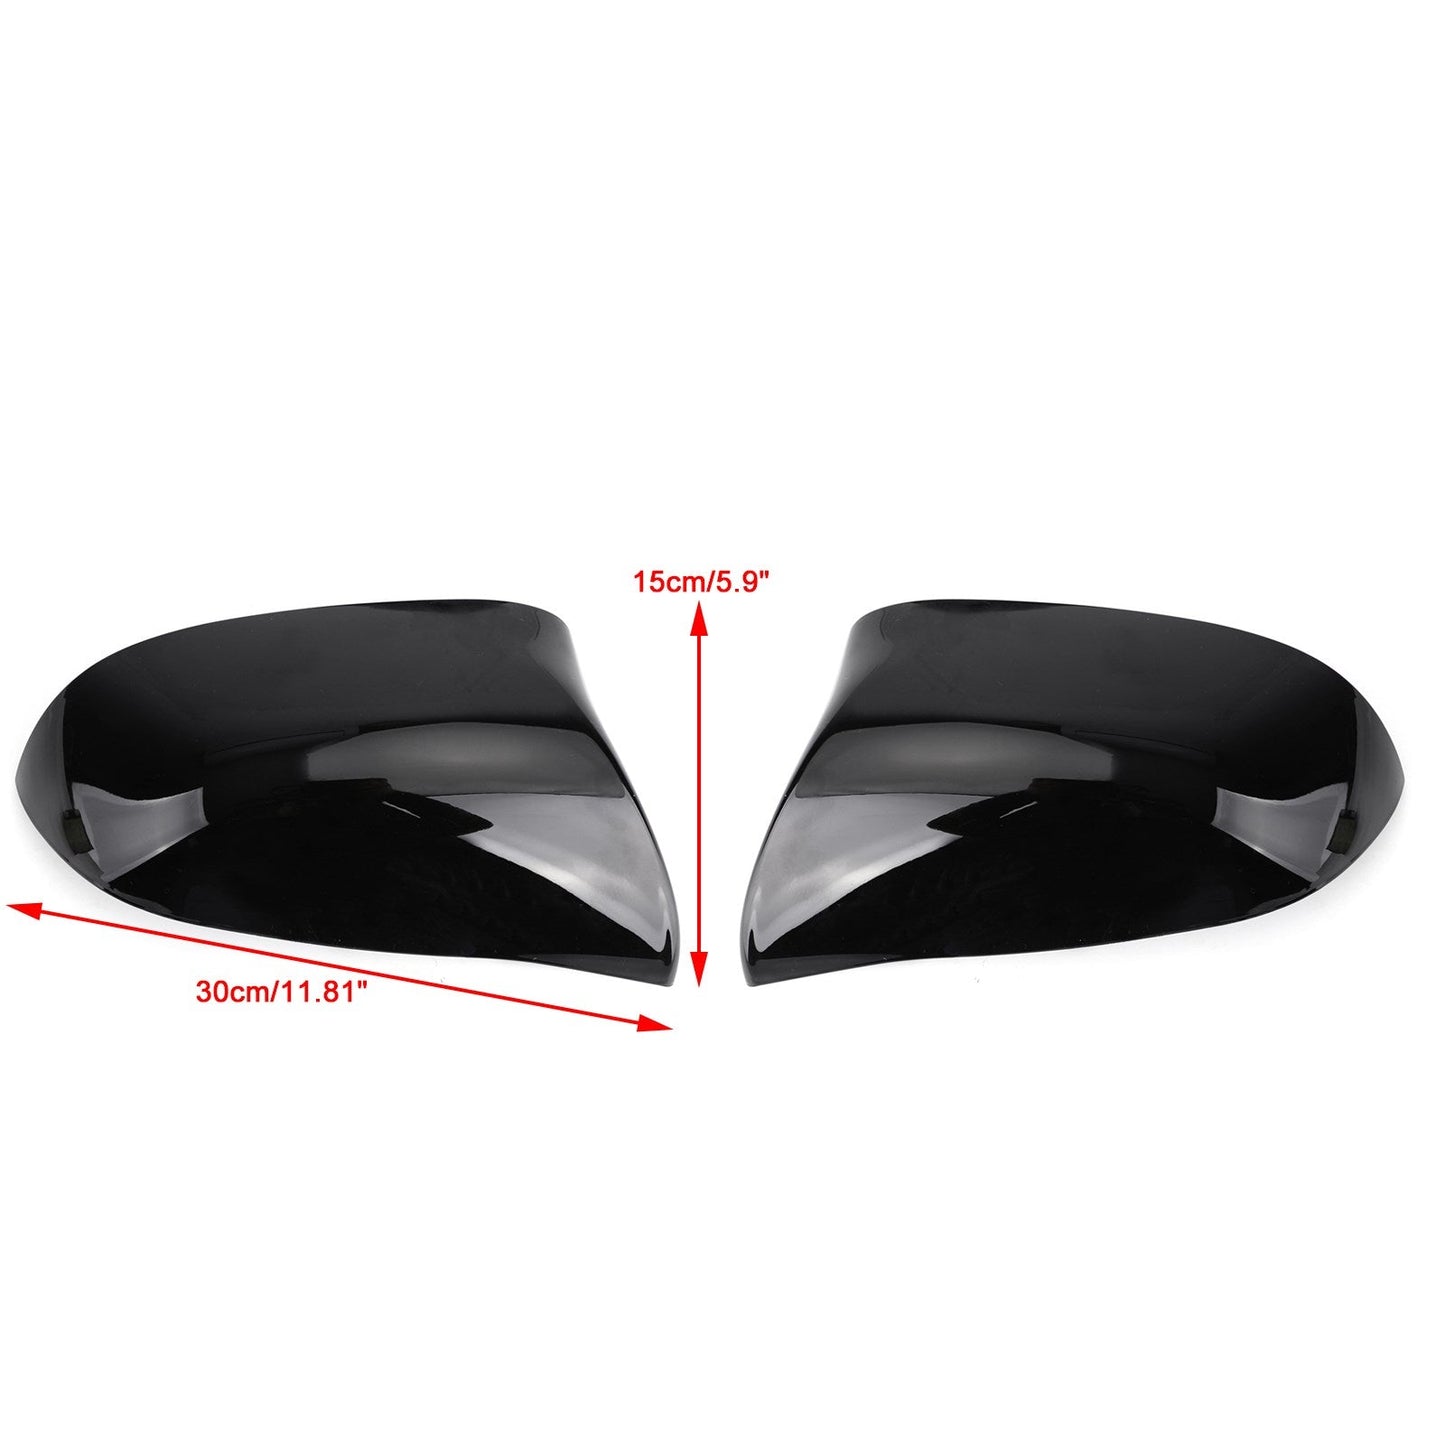 Rearview Mirror Cover Fit For BMW F15 X5 & F16 X6 X4 F26 X3 E83 2014-2018 (Will Not Fit X5M & X6M Models) GBLK